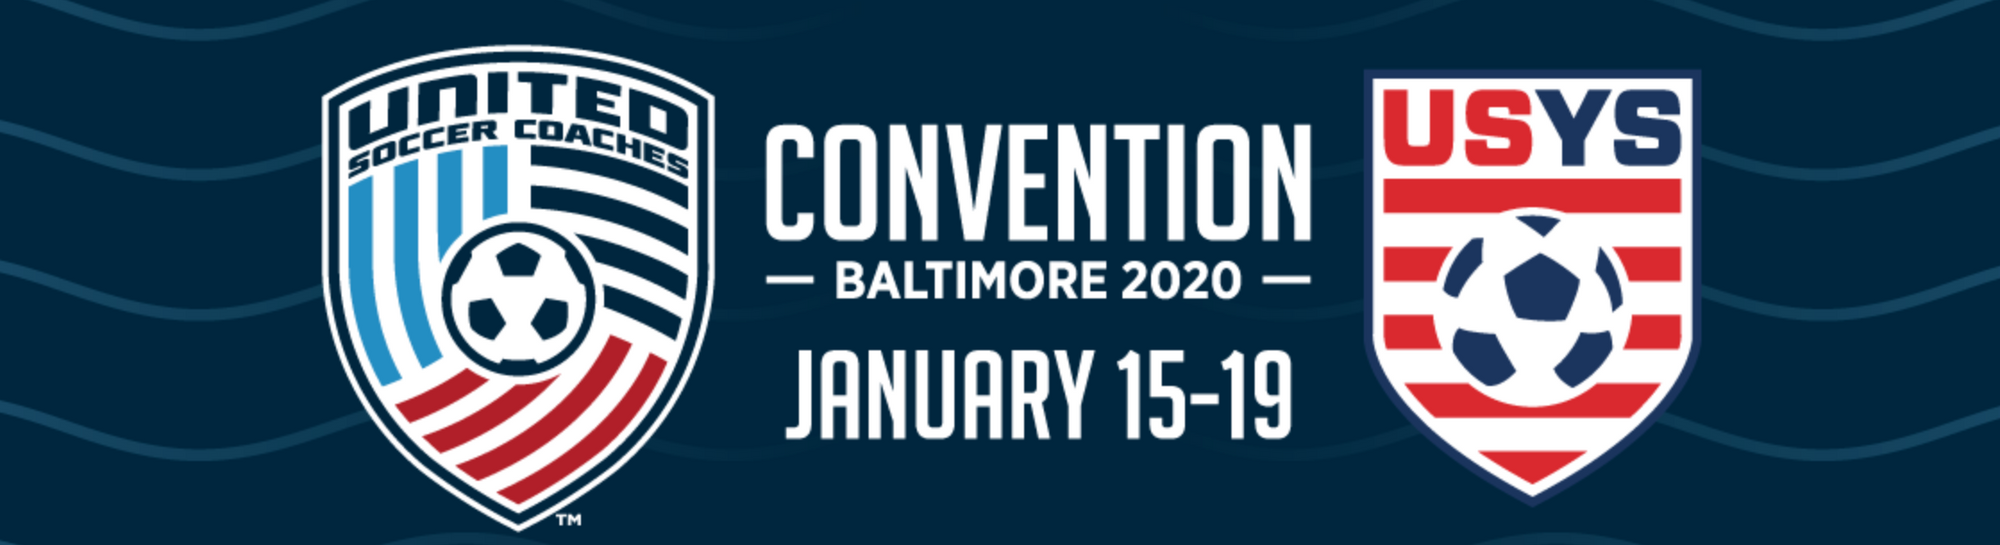 Kickit at the United Soccer Coaches Convention 2020 Baltimore